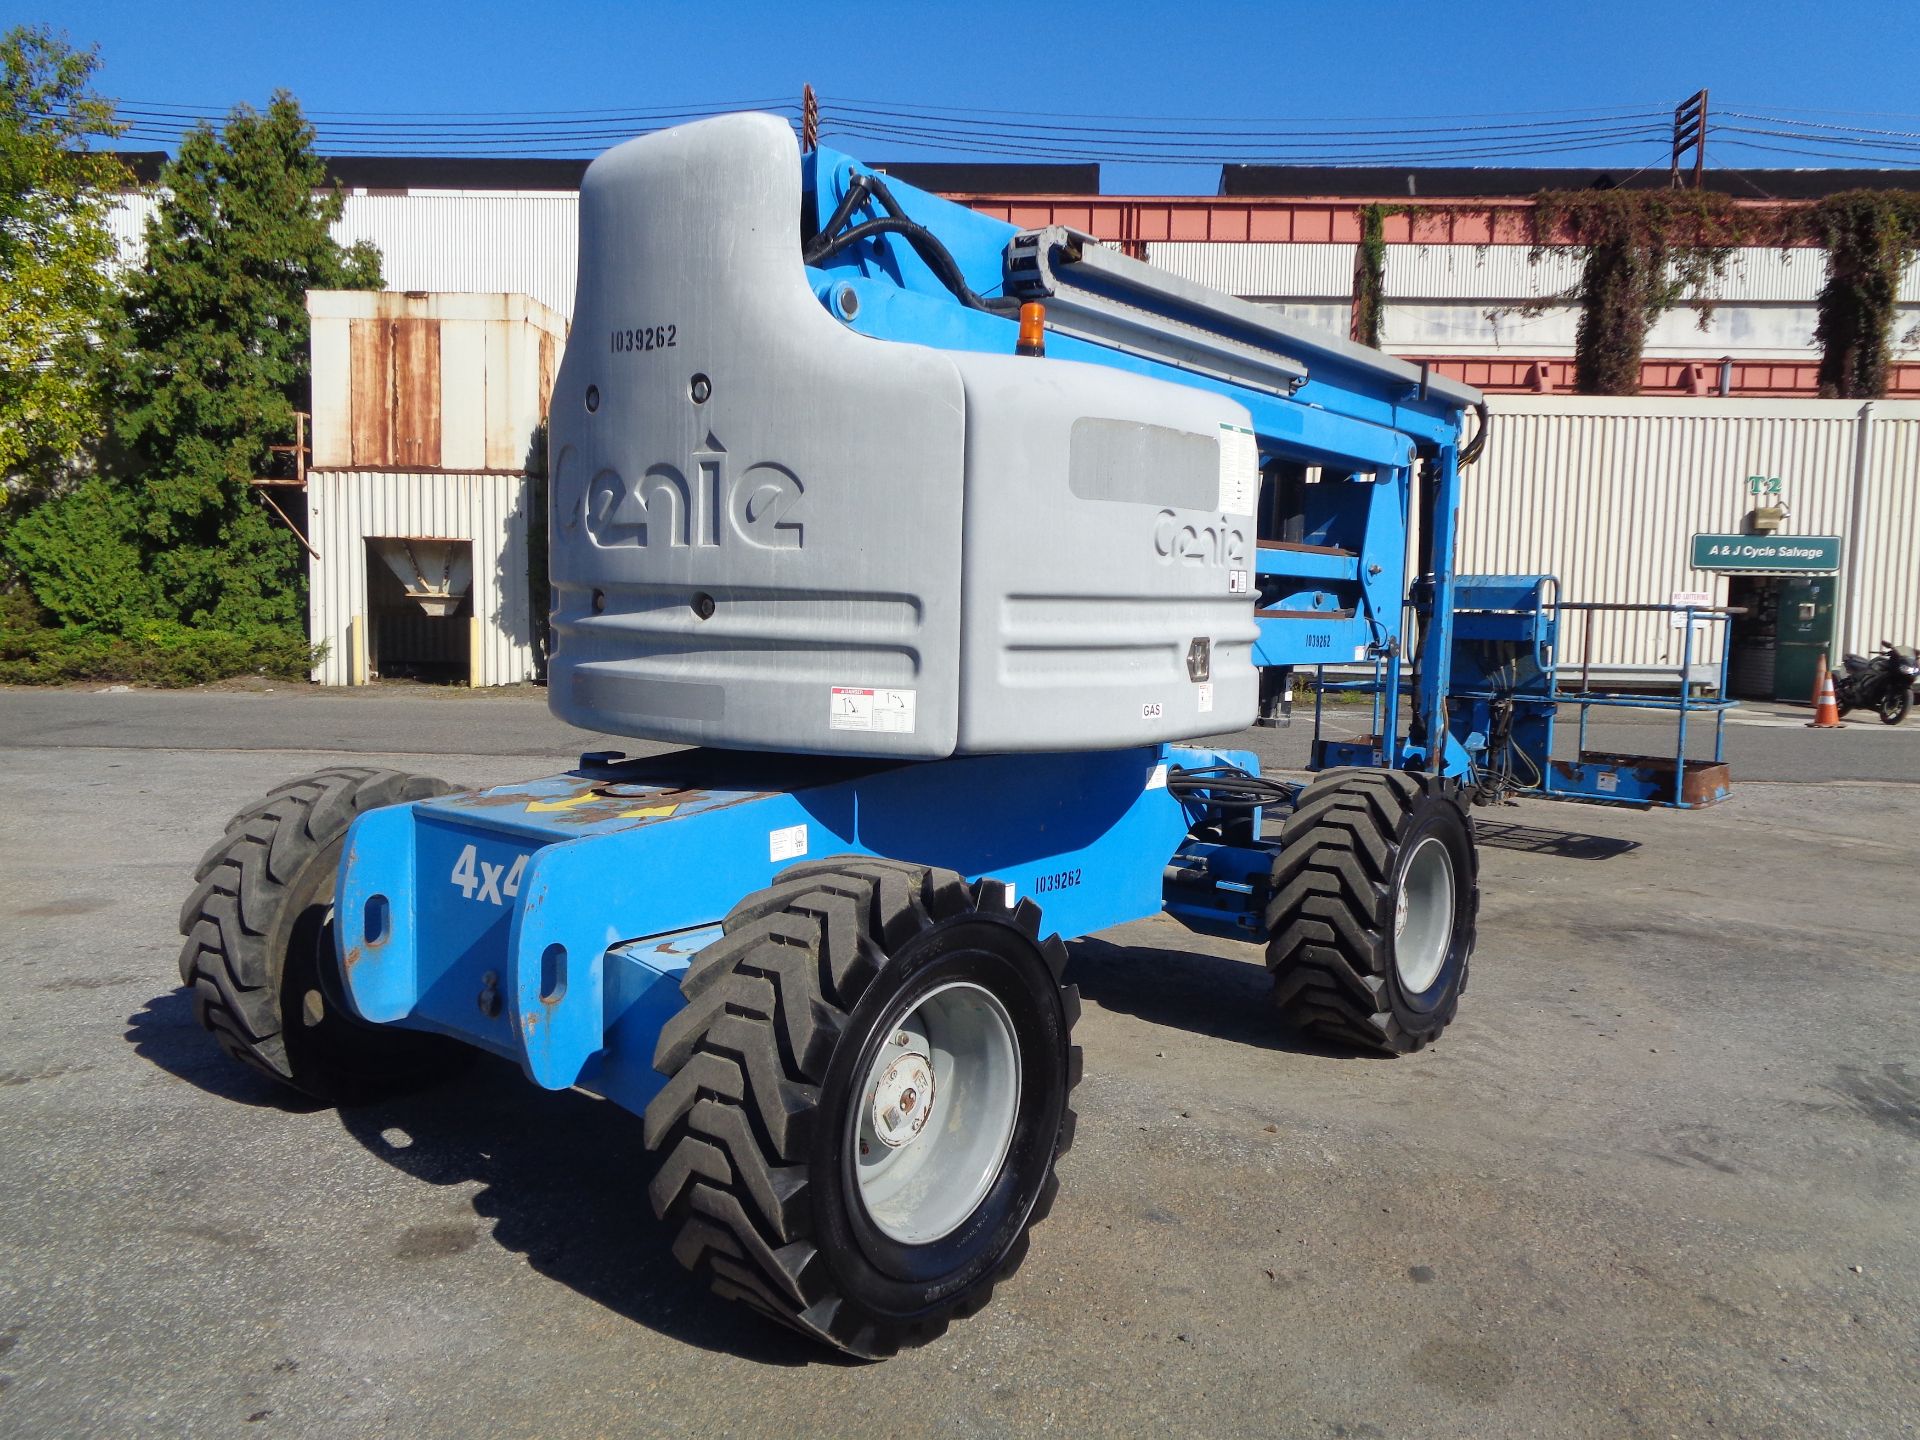 2008 Genie Z60 34 Articulating Boom Lift - Image 6 of 20